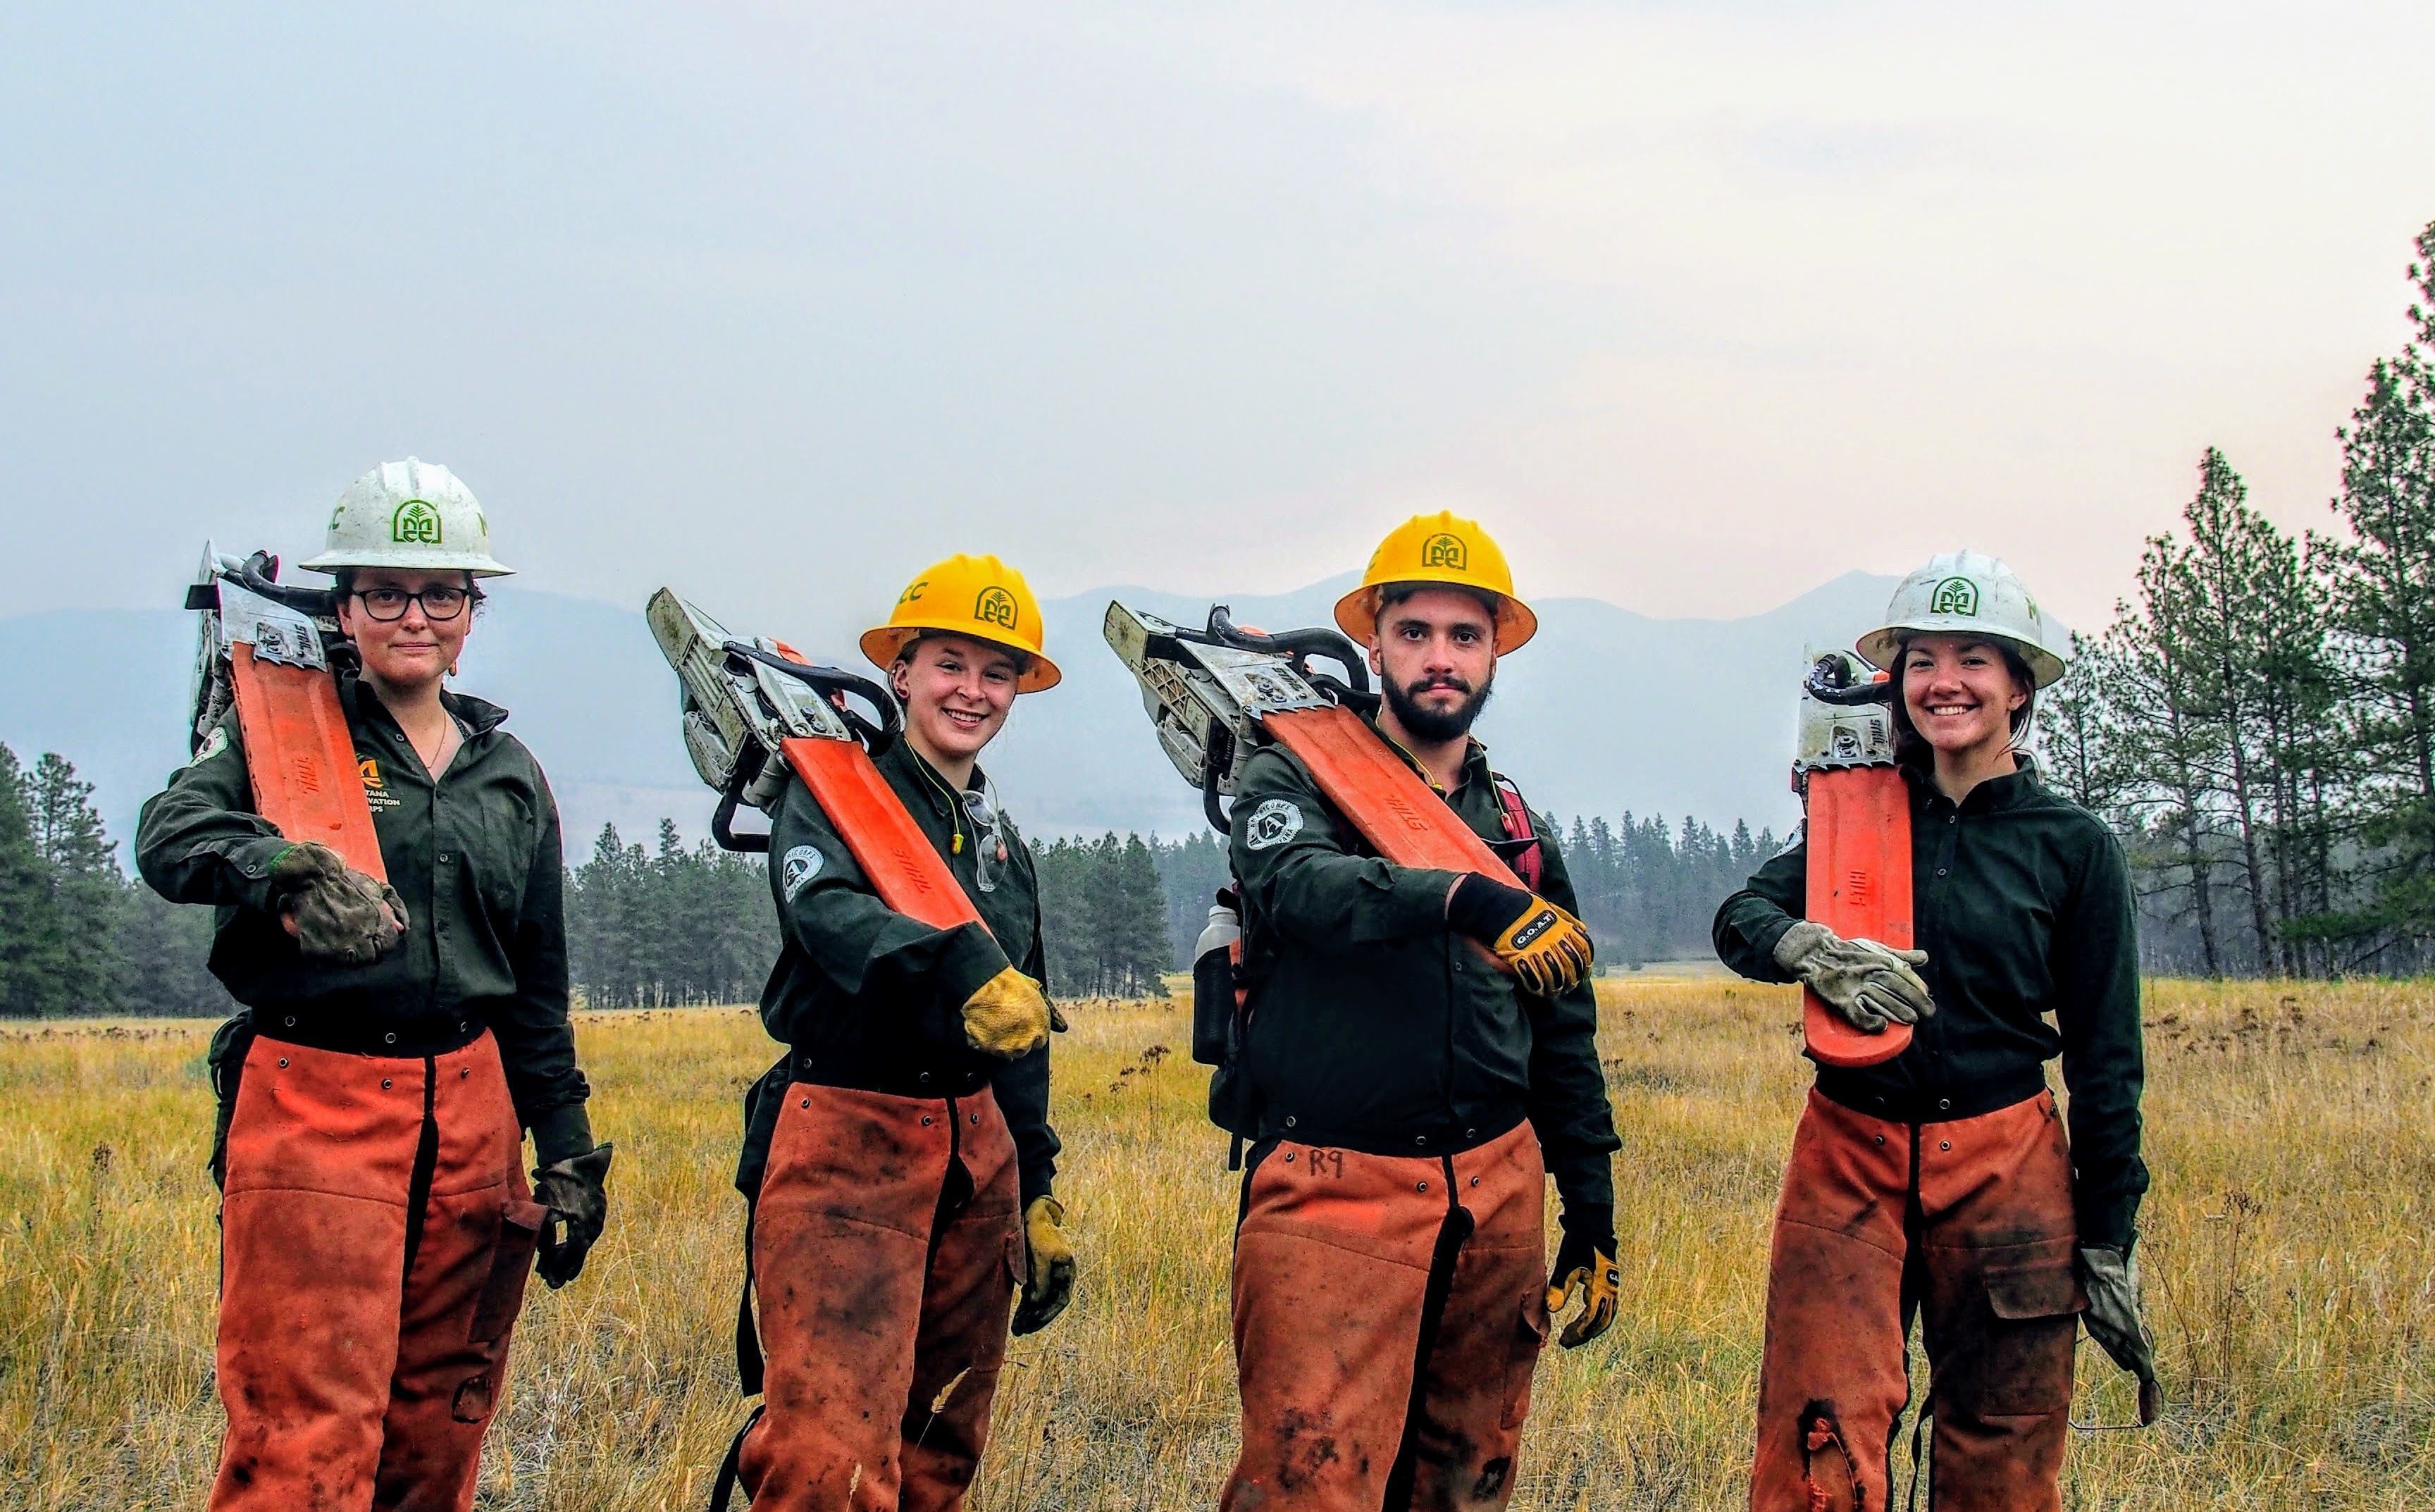 [Image Description: Four MCC members, holding chainsaws over their right shoulders, stand amidst a smoky backdrop. They are all wearing their uniforms, including hard hats and bright orange chaps.]